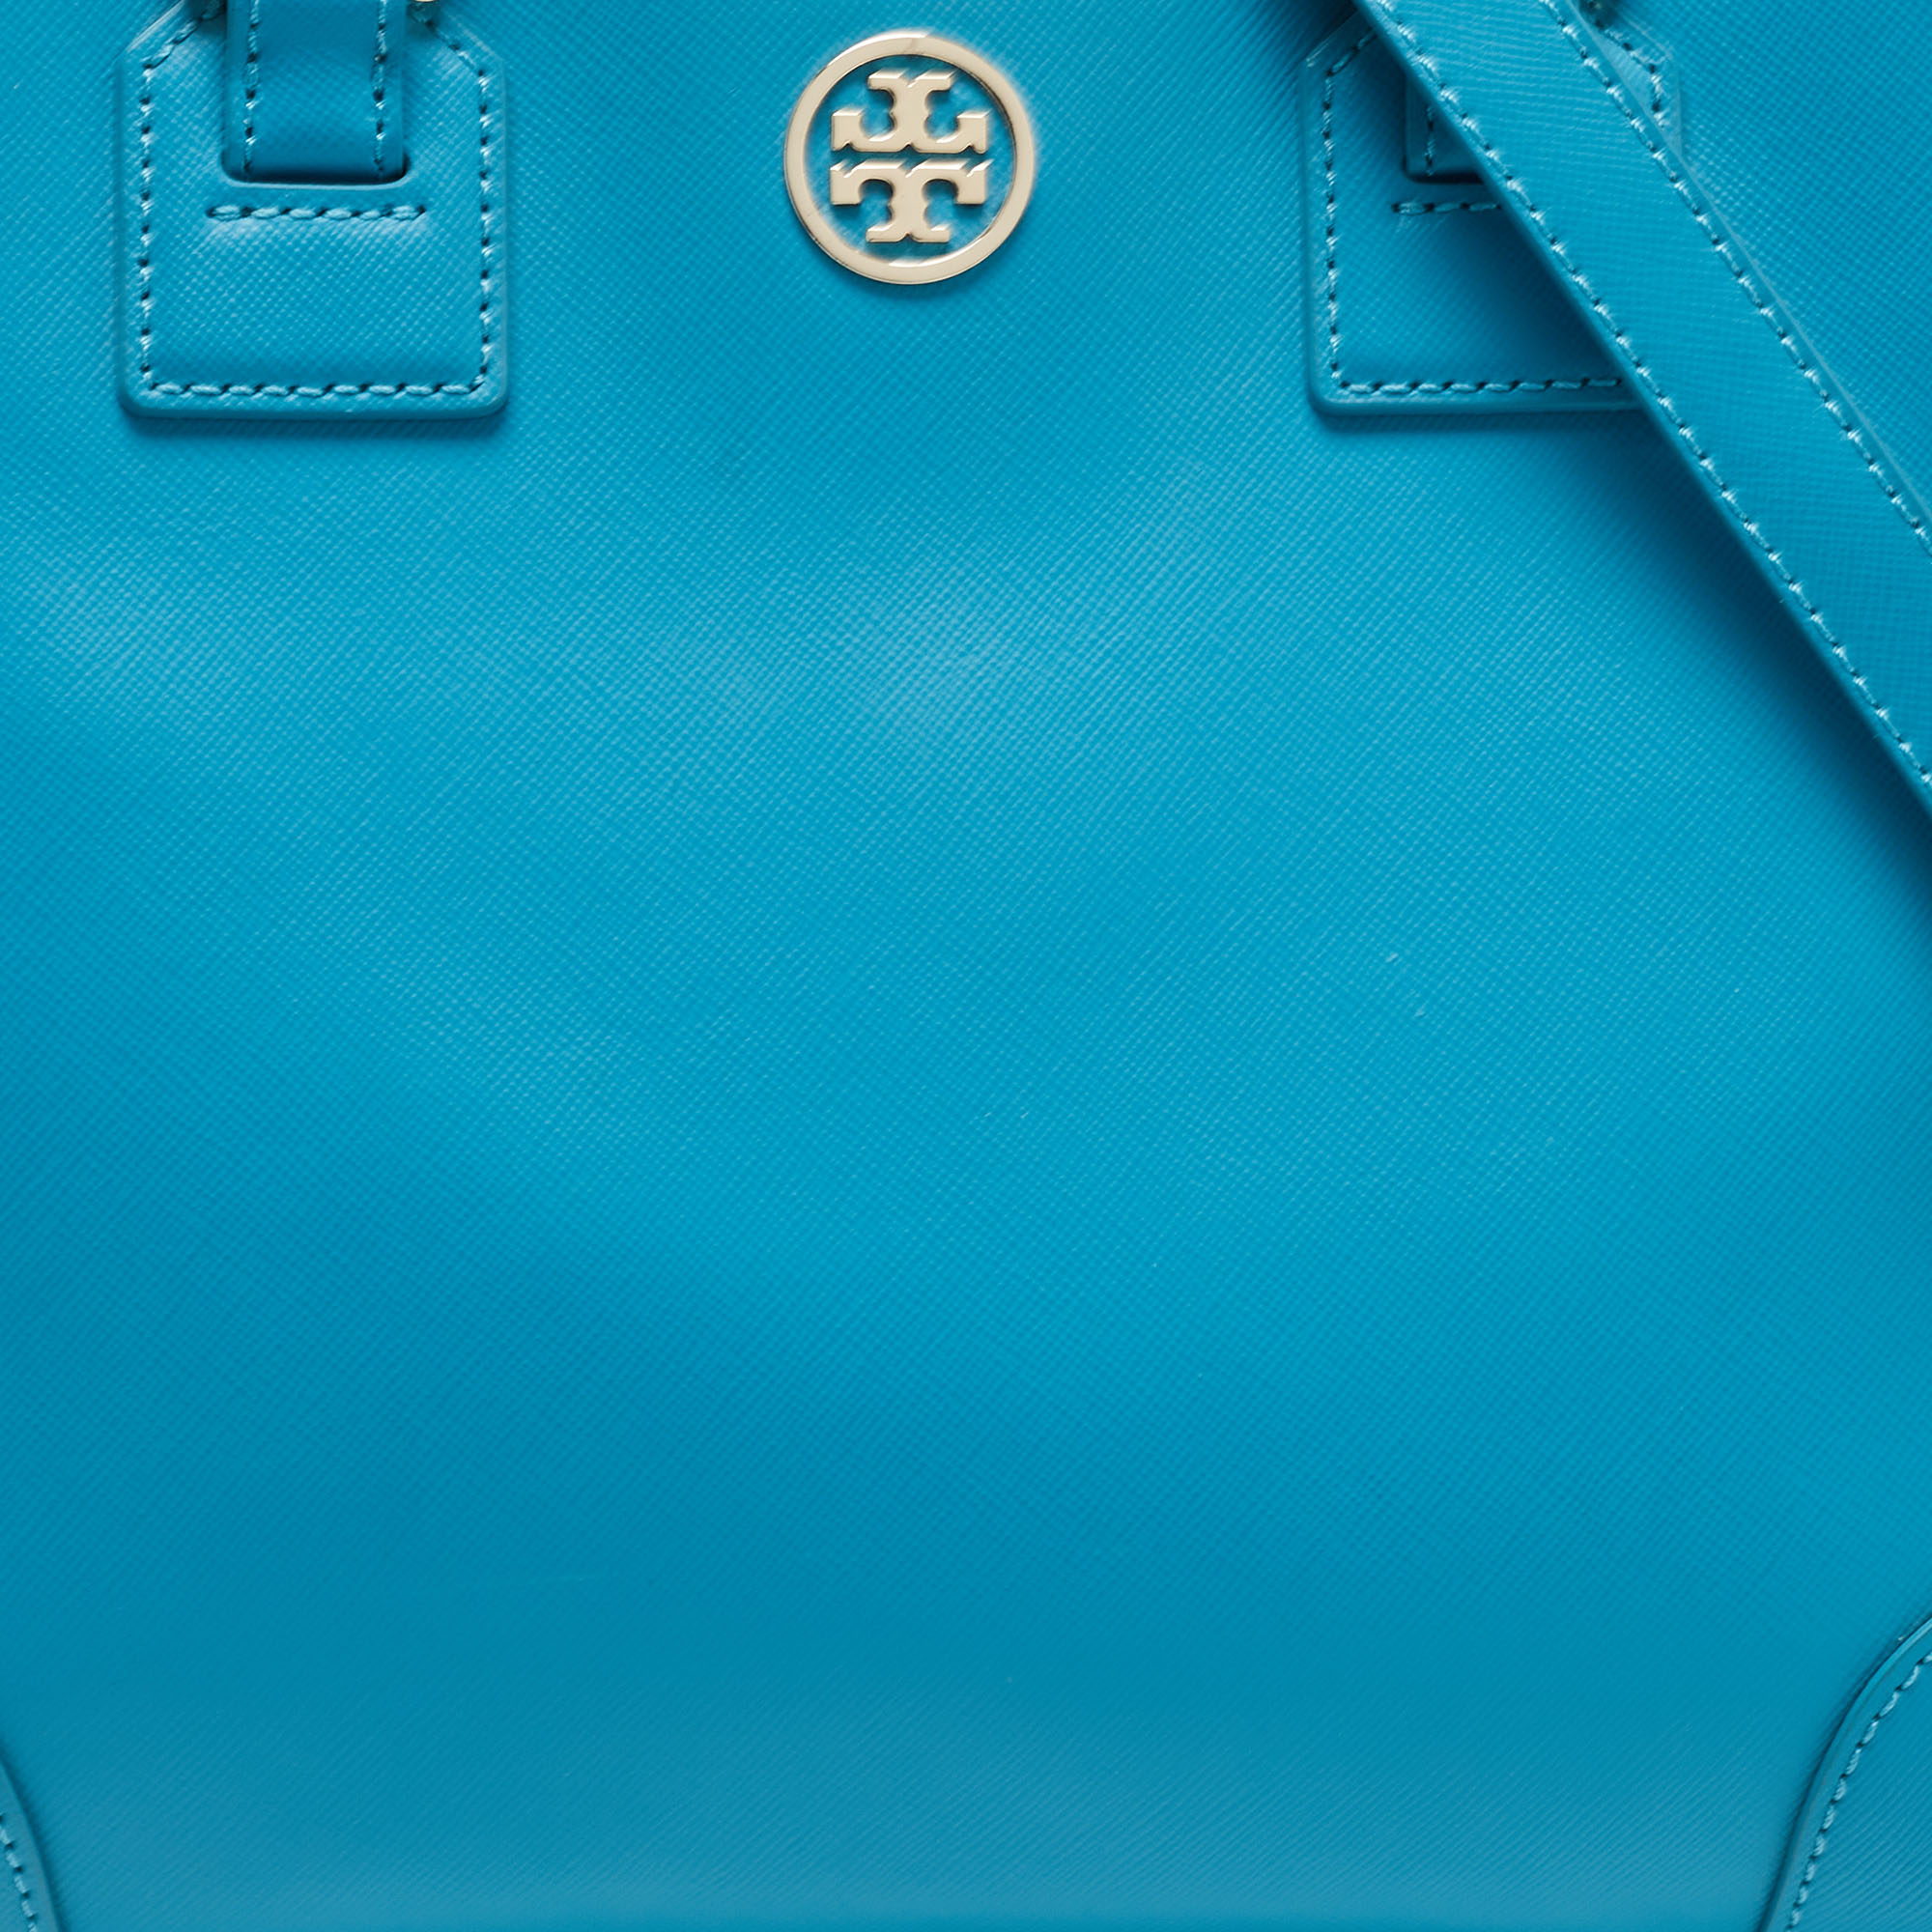 Tory Burch Teal Blue Saffiano Leather Robinson Tote